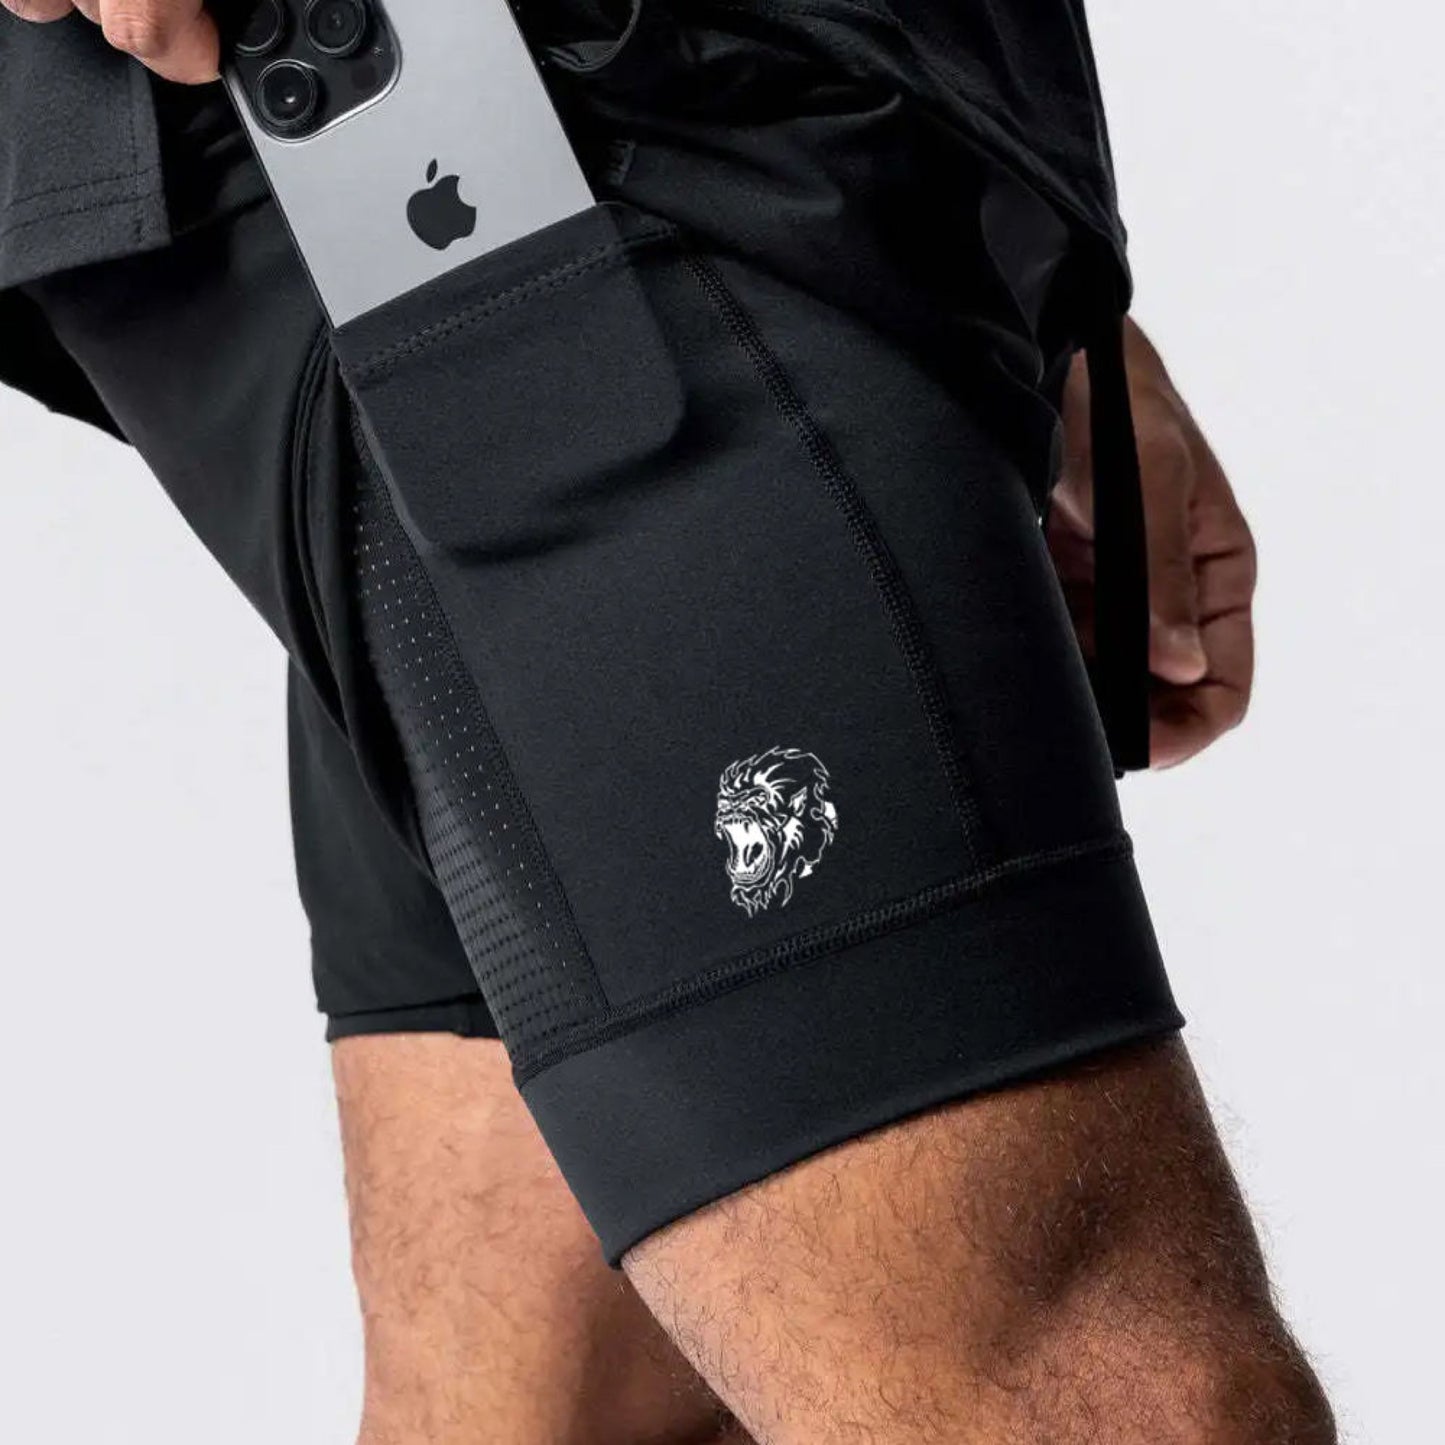 Secure 2.0 - Men’s black shorts with breathable tights